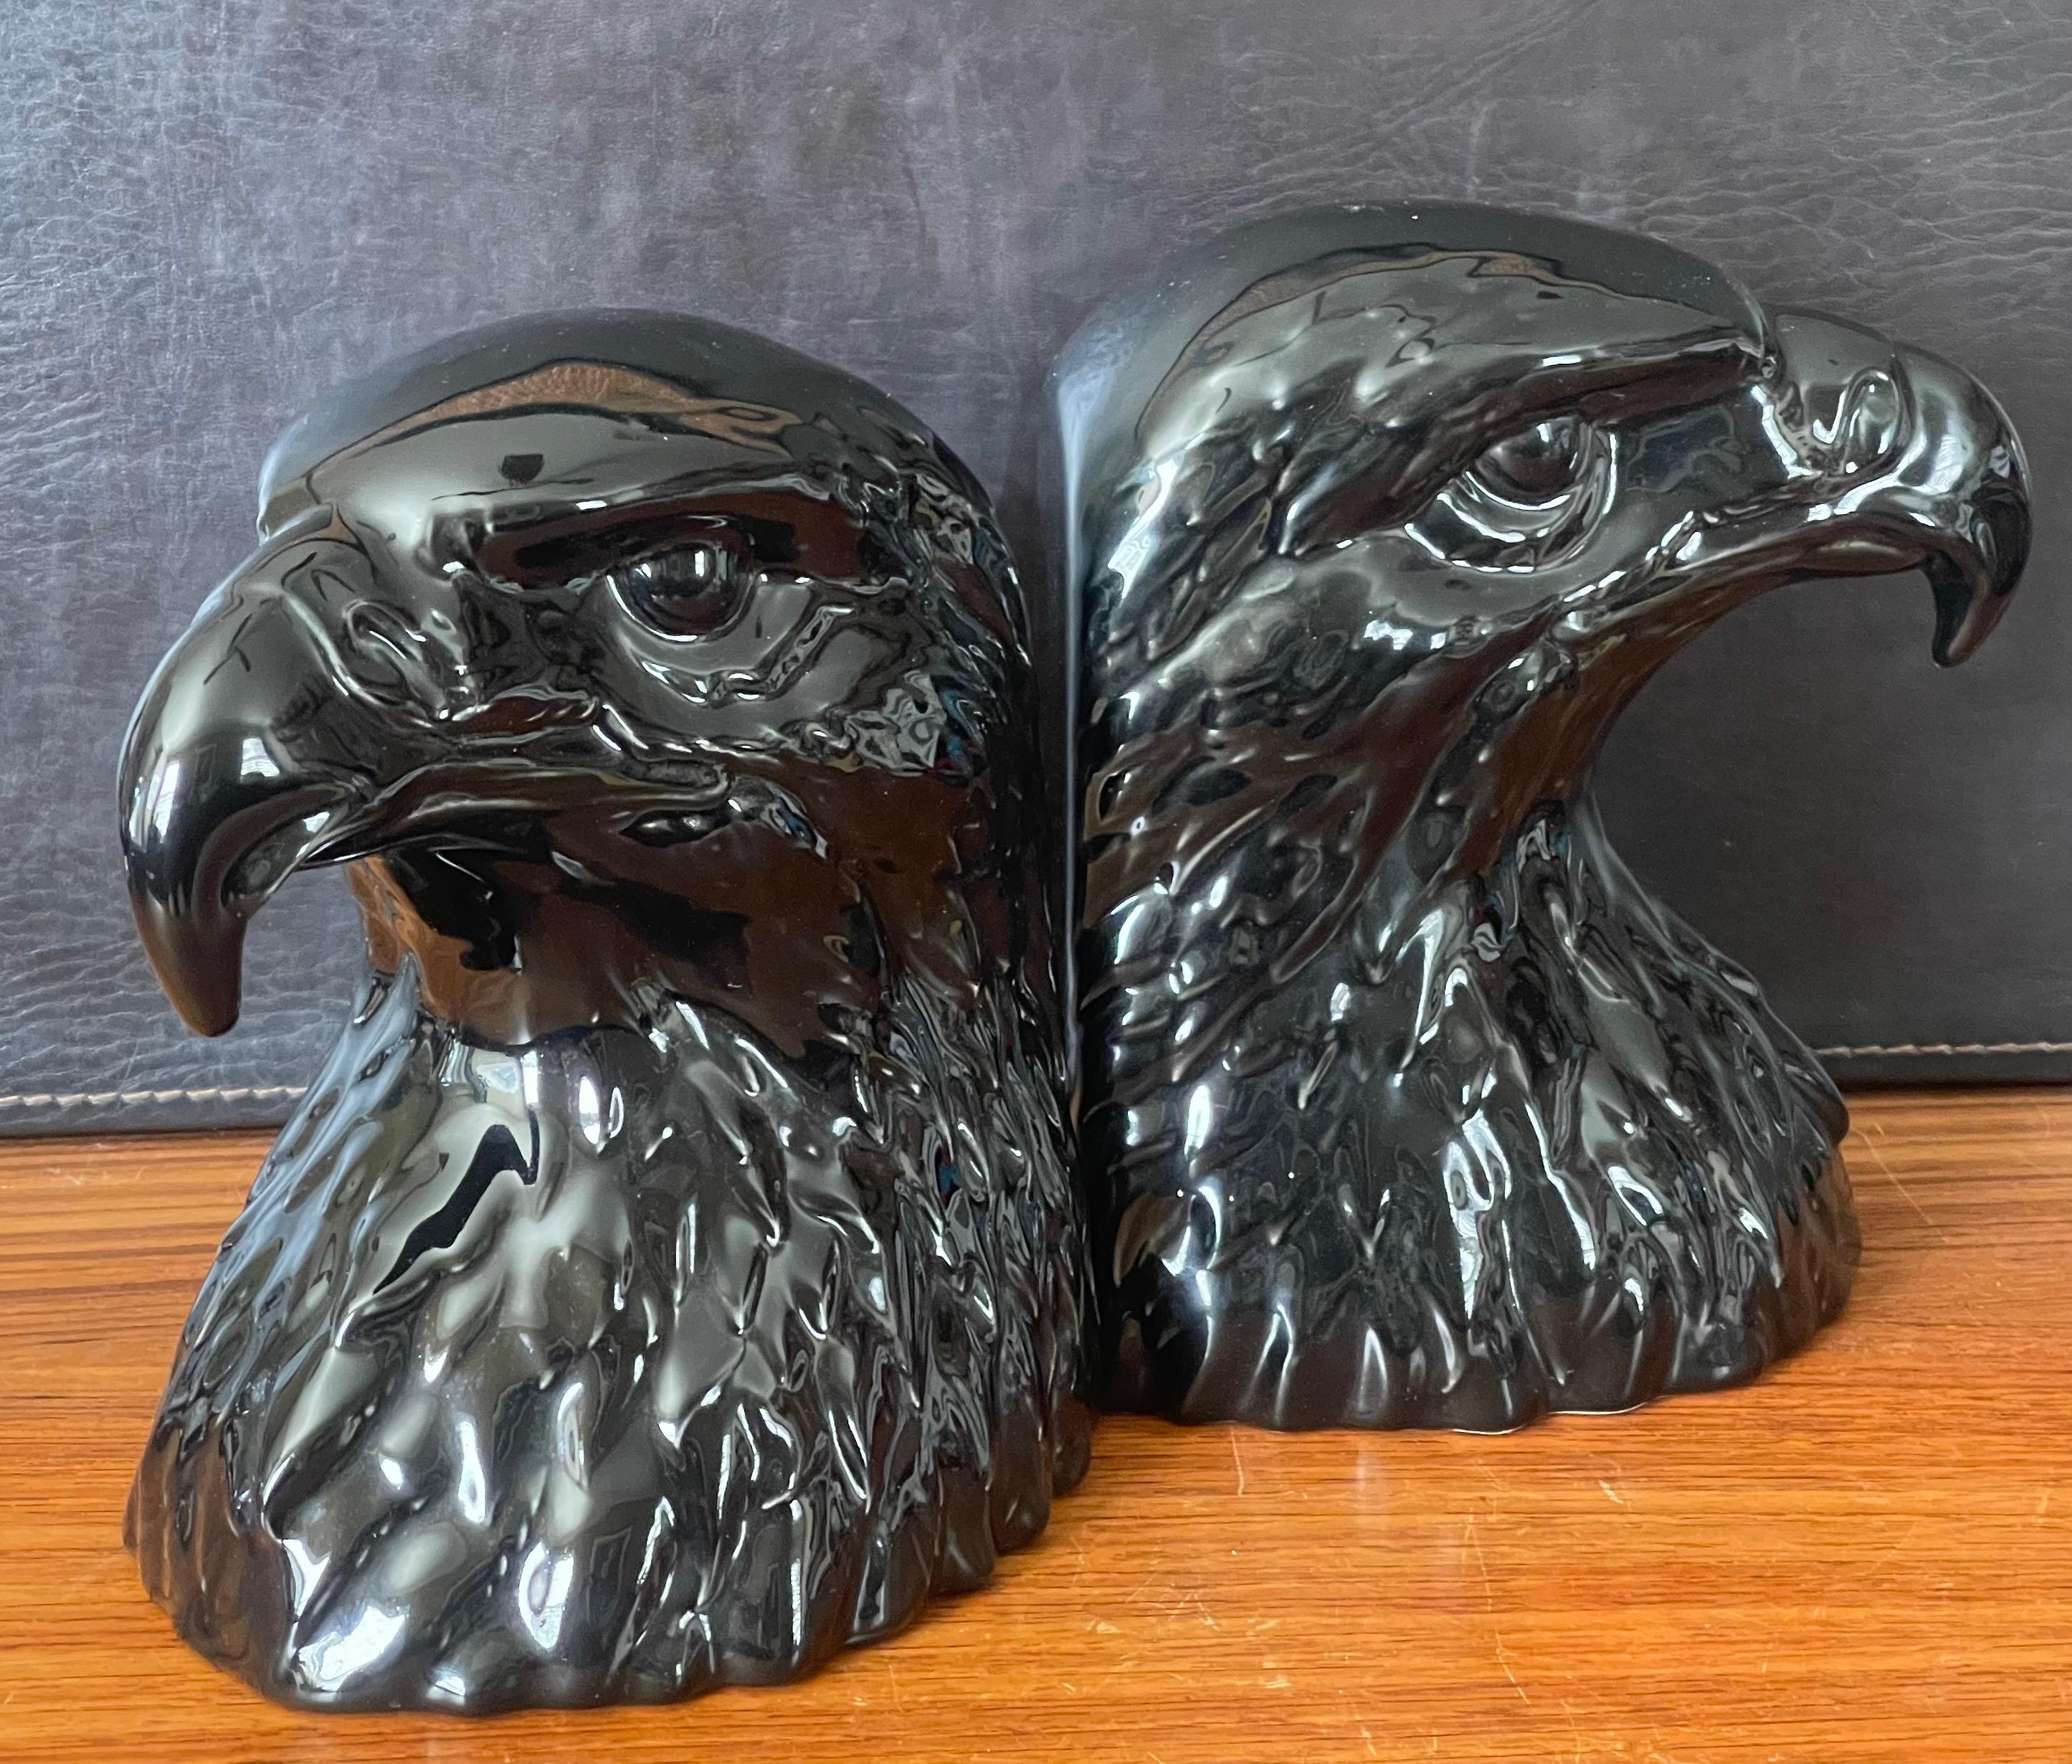 A very cool pair of glossy black porcelain bald eagle head bookends by Hispania Dasio / Lladro of Spain, circa 1985. The set is quite striking and in very good vintage condition with no chips or cracks; the pair measure 13.5